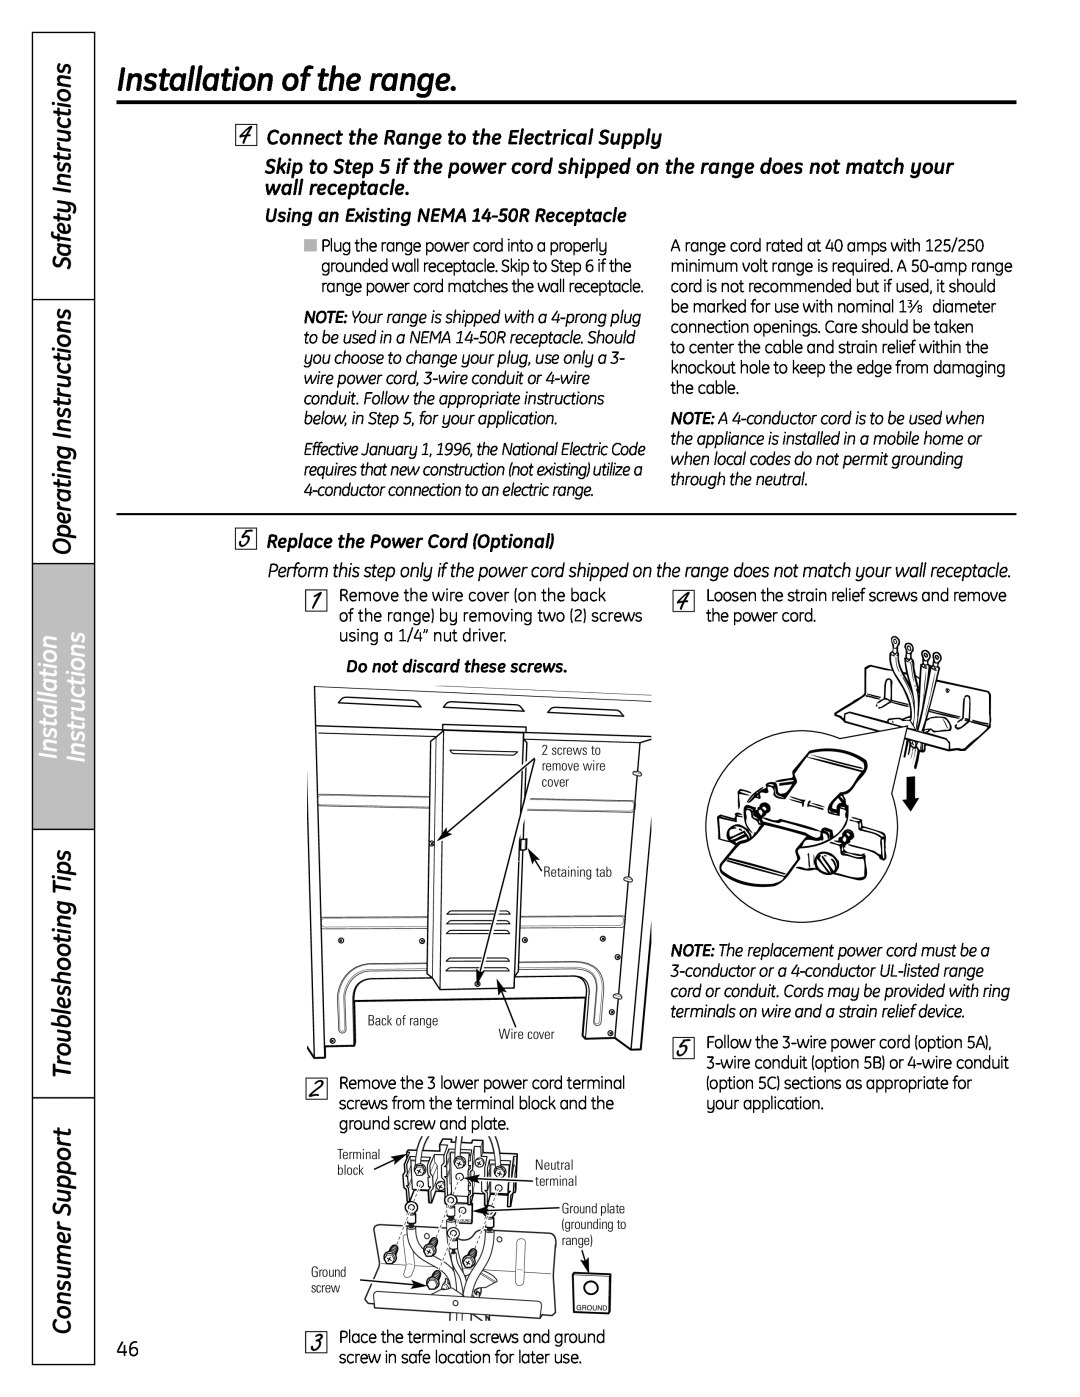 GE 49-85167-1, C2S980, 04-09 JR Connect the Range to the Electrical Supply, Installationof the range, Safety Instructions 